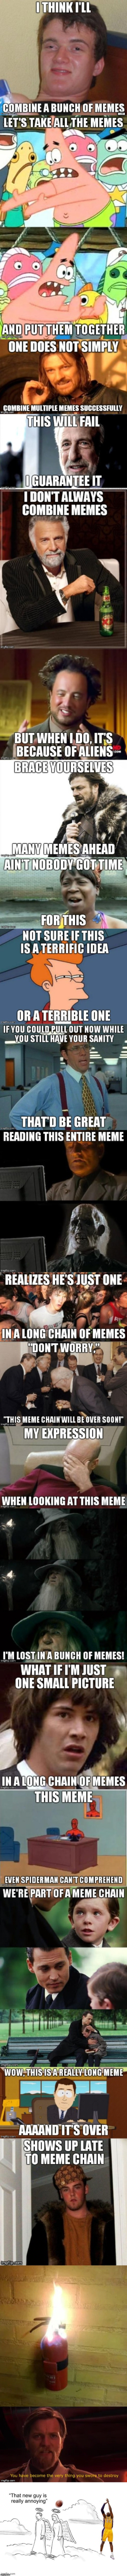 LONGEST MEME IN THE WORLD | image tagged in long,upvote | made w/ Imgflip meme maker